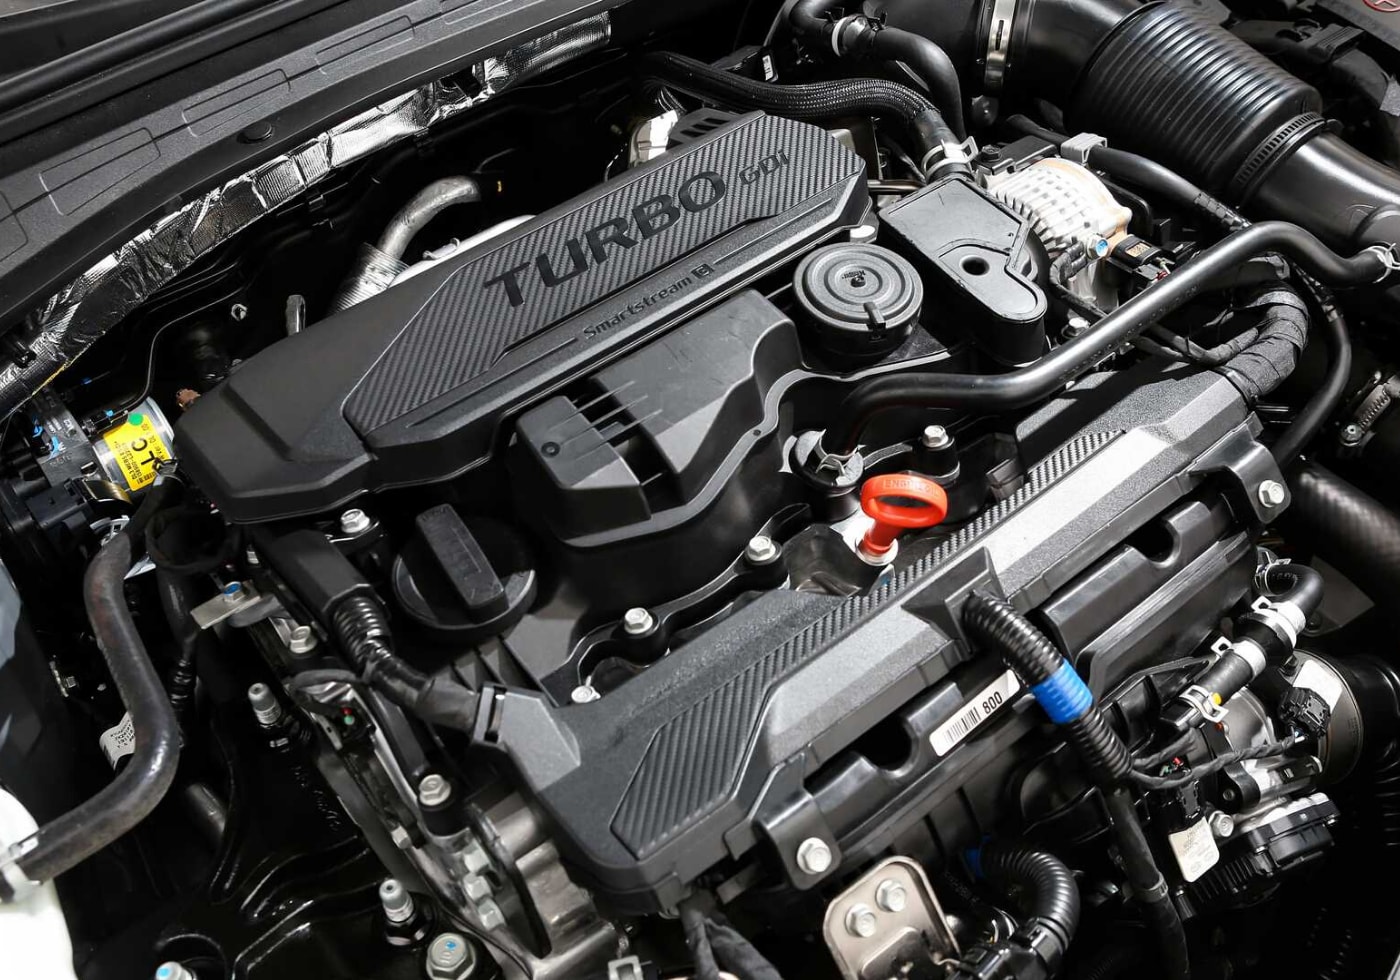 A look under the hood of the upcoming 2021 Kia K5 (Optima) showing a powerful, fuel-efficient turbo GDI engine